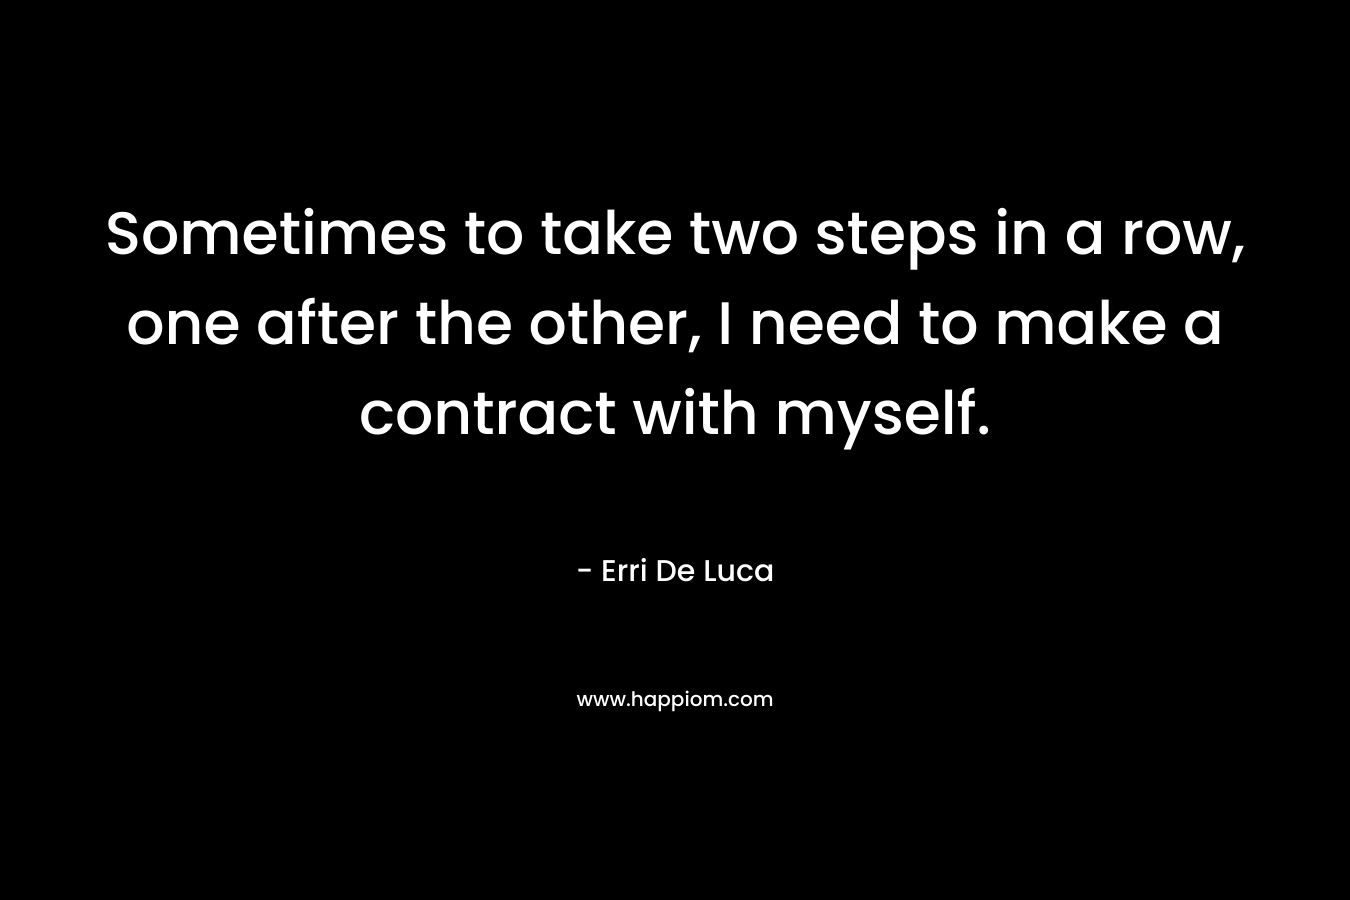 Sometimes to take two steps in a row, one after the other, I need to make a contract with myself. – Erri De Luca